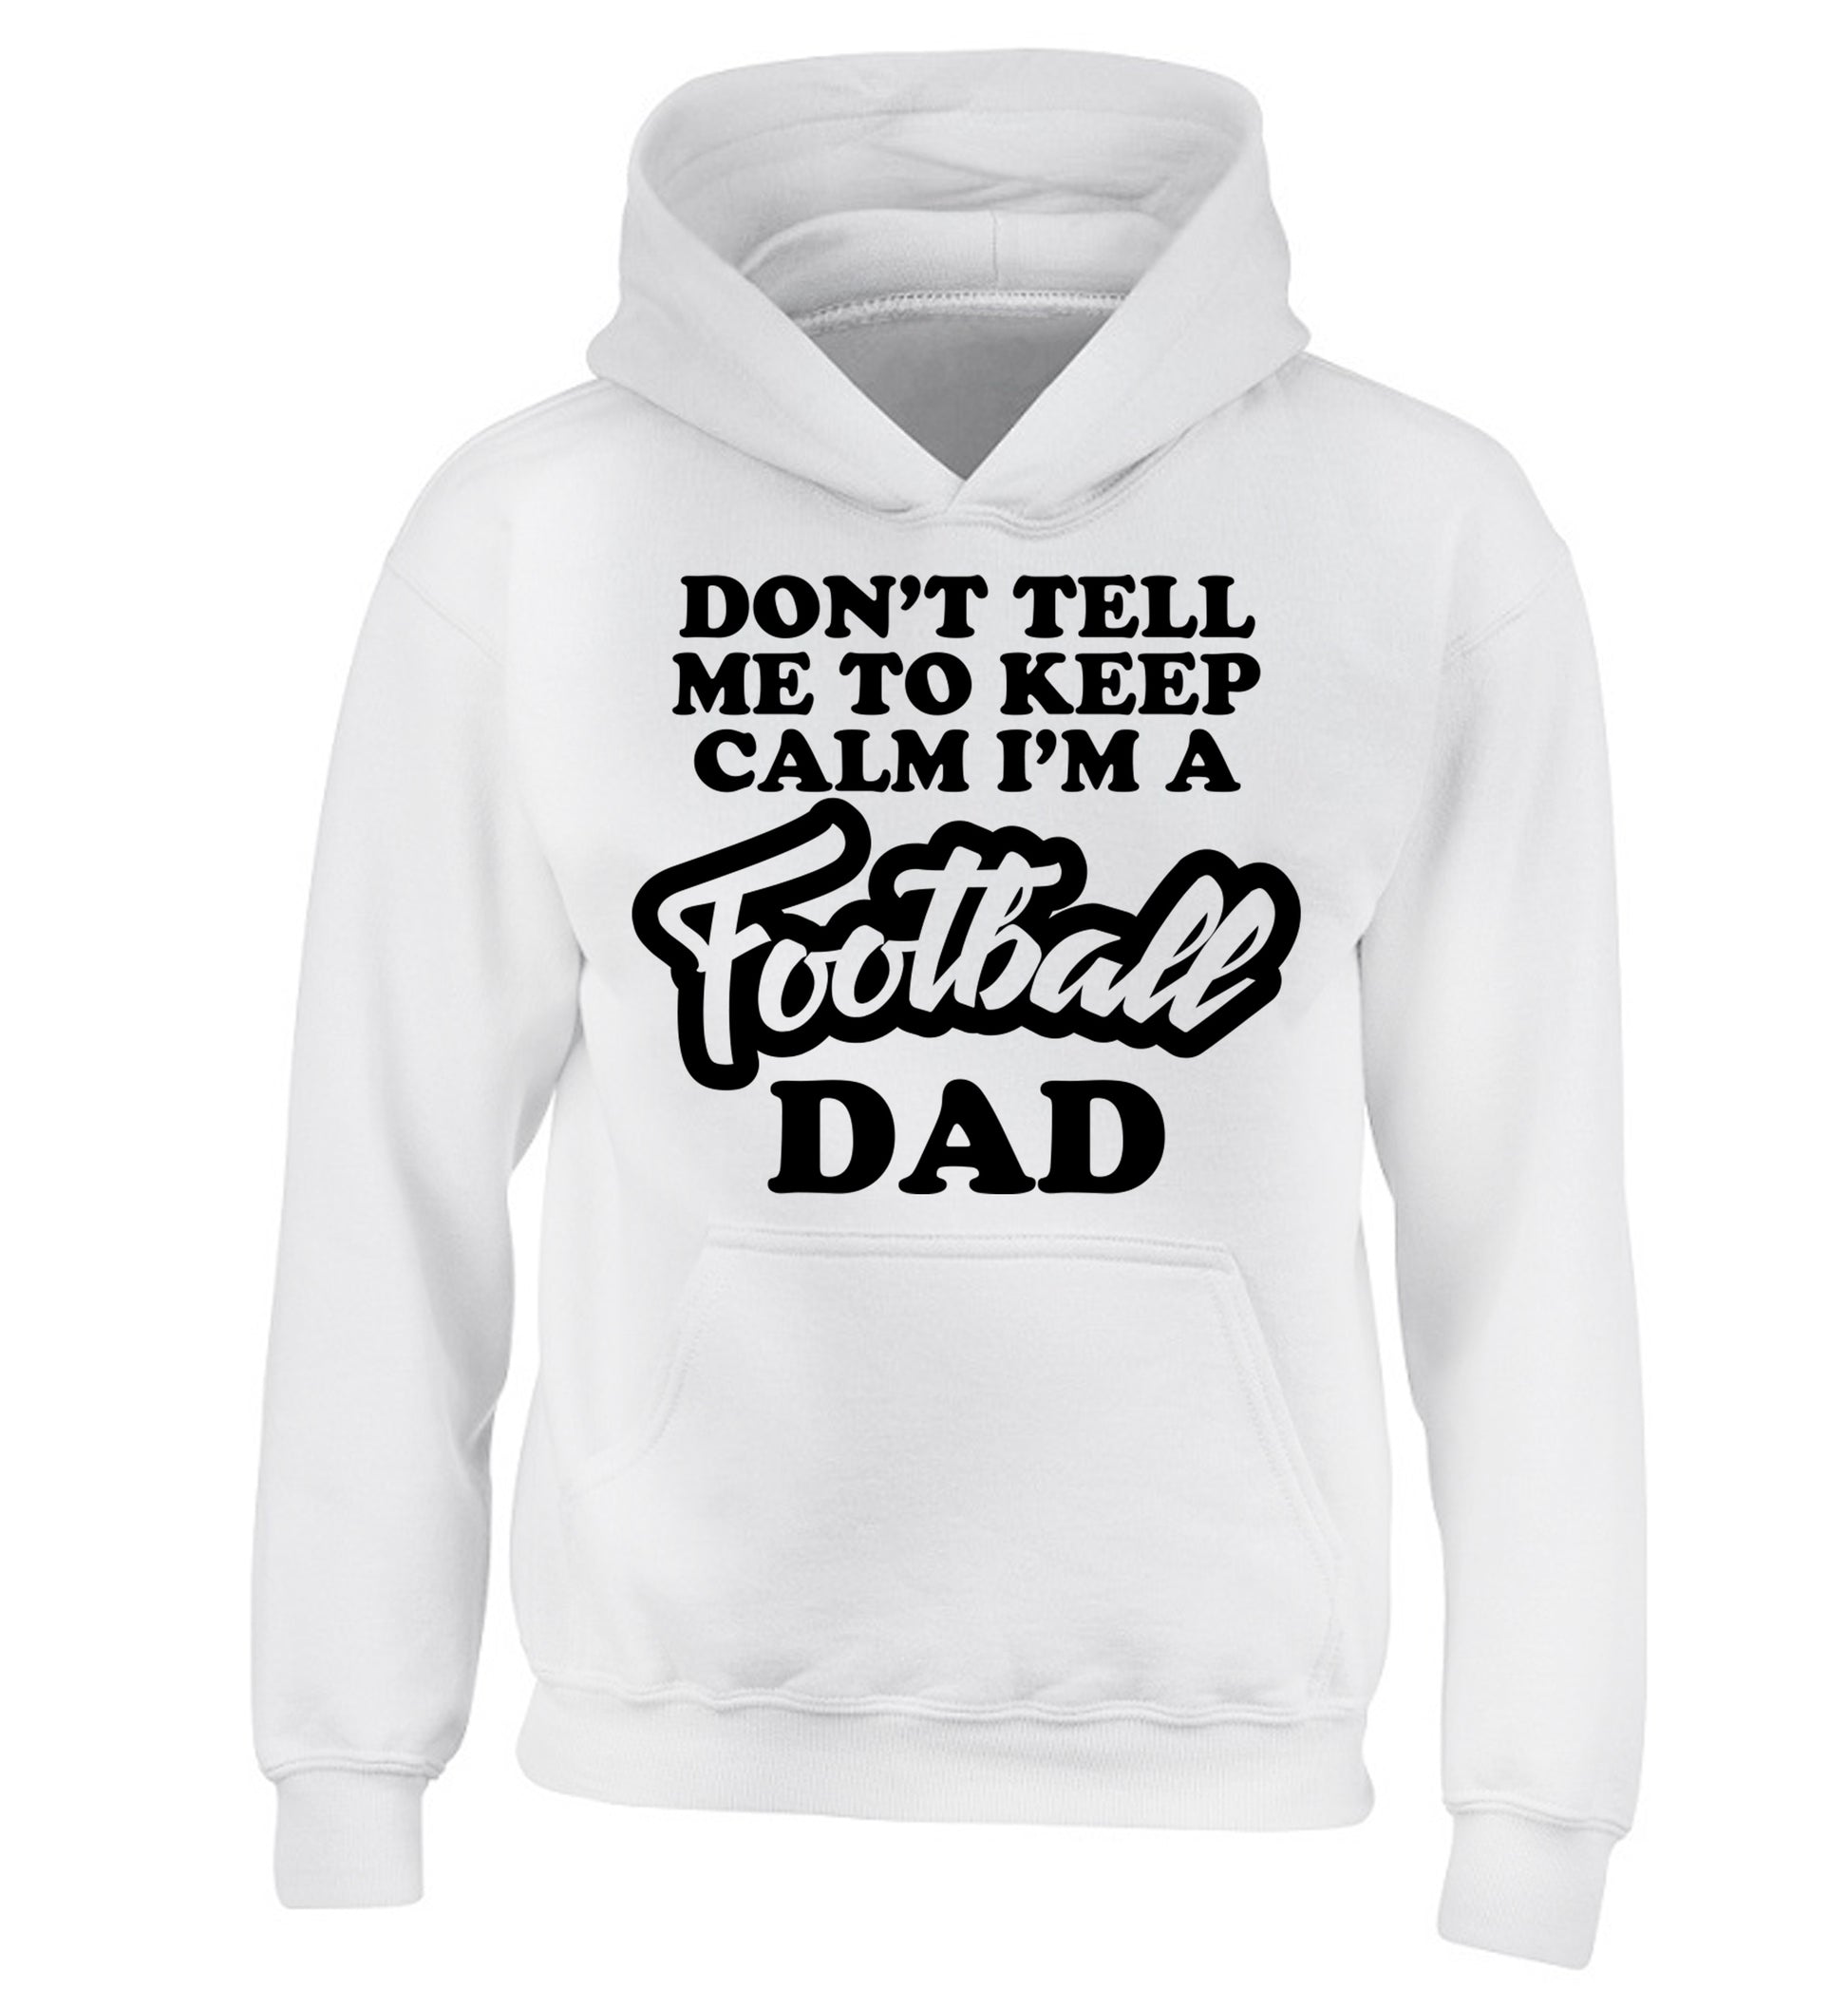 Don't tell me to keep calm I'm a football dad children's white hoodie 12-14 Years